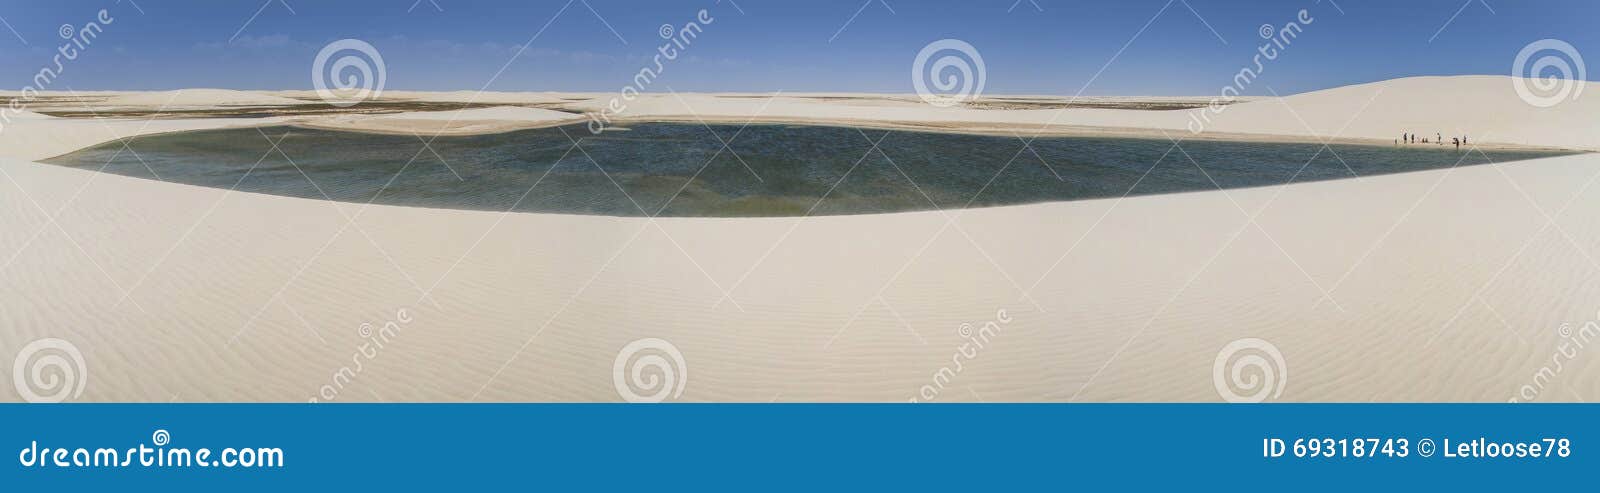 panoramic view of the lenÃÂ§ÃÂ³is maranhenses national park, maranhÃÂ£o, brazil